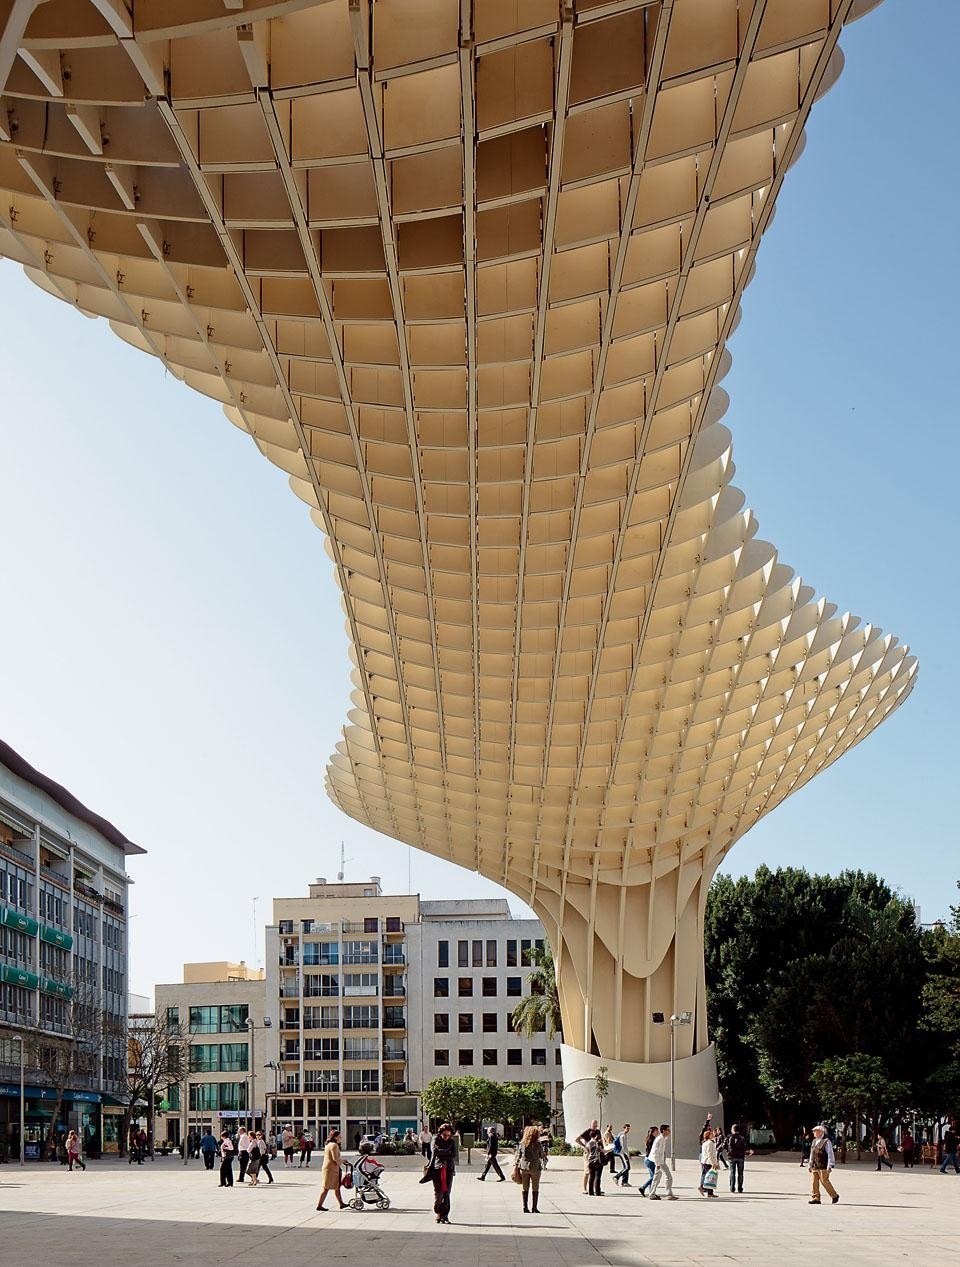 The frame is made of wood
laminate and steel joined by
means of a heat-resistant
glue. The Parasol is the
world’s largest construction to
be held together with glue, and
one of the most complex ever
to have been built in wood.